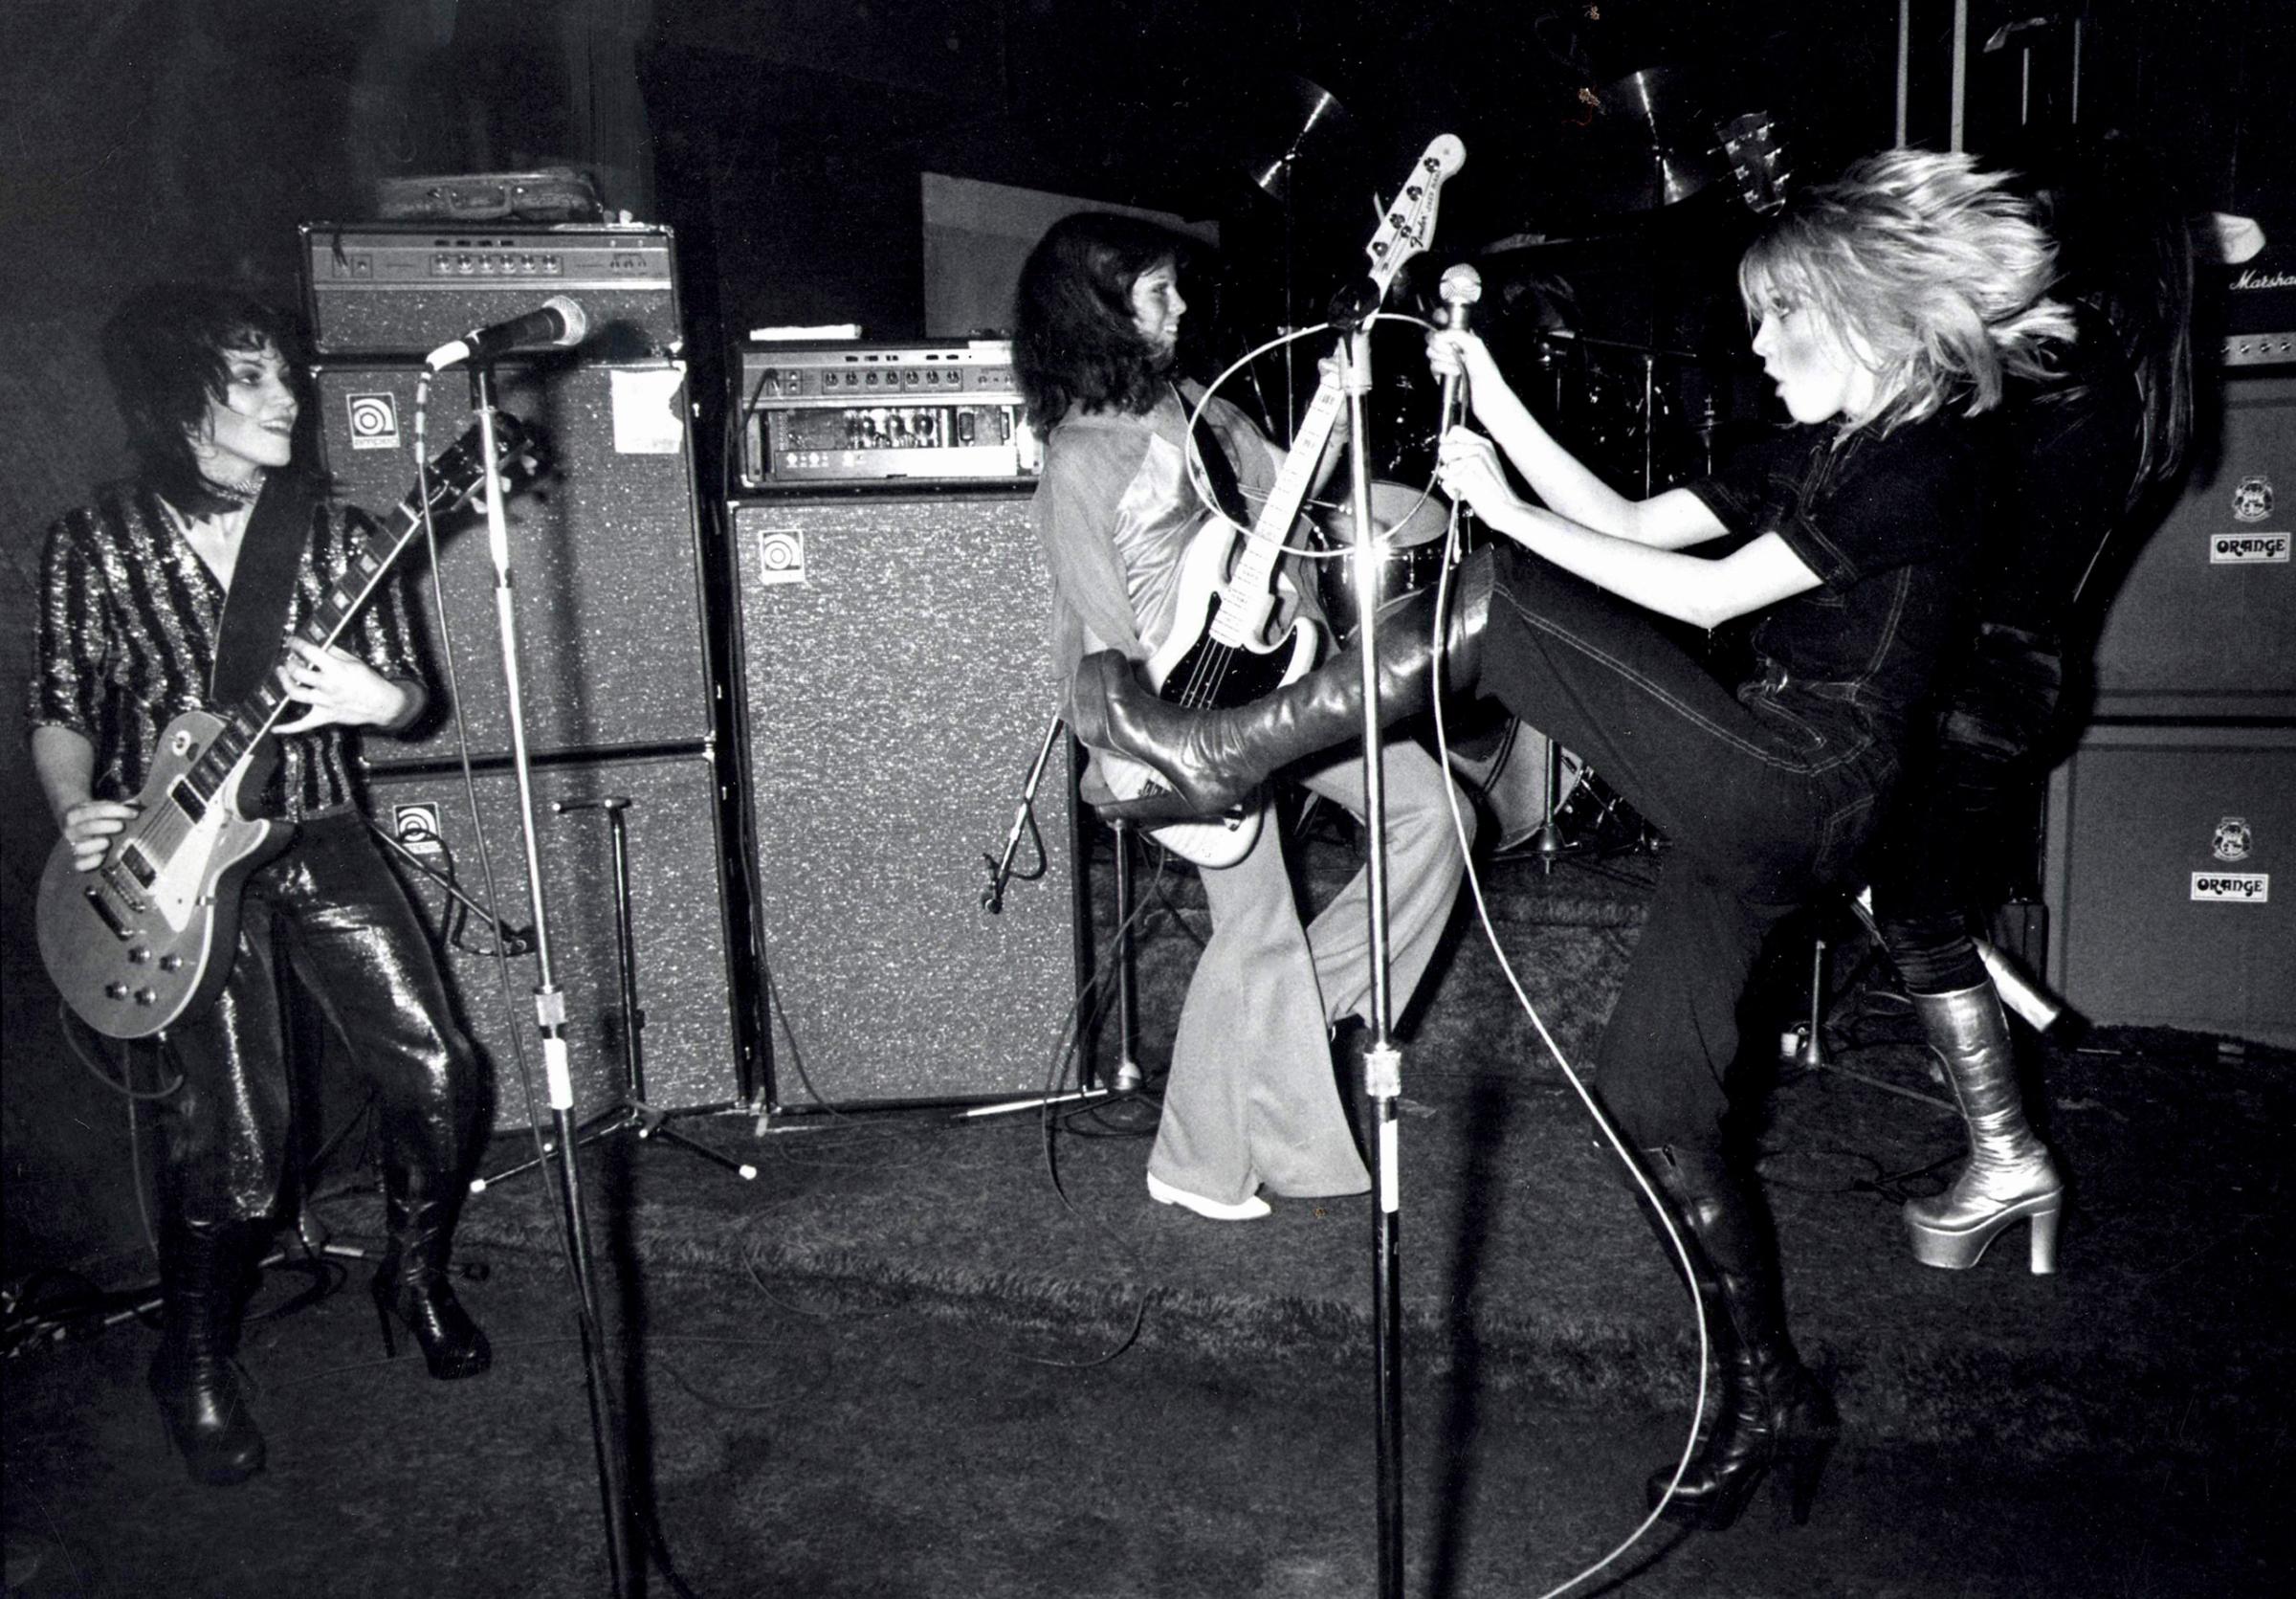 The Runaways performing at CBGB in New York City on August 2, 1976.